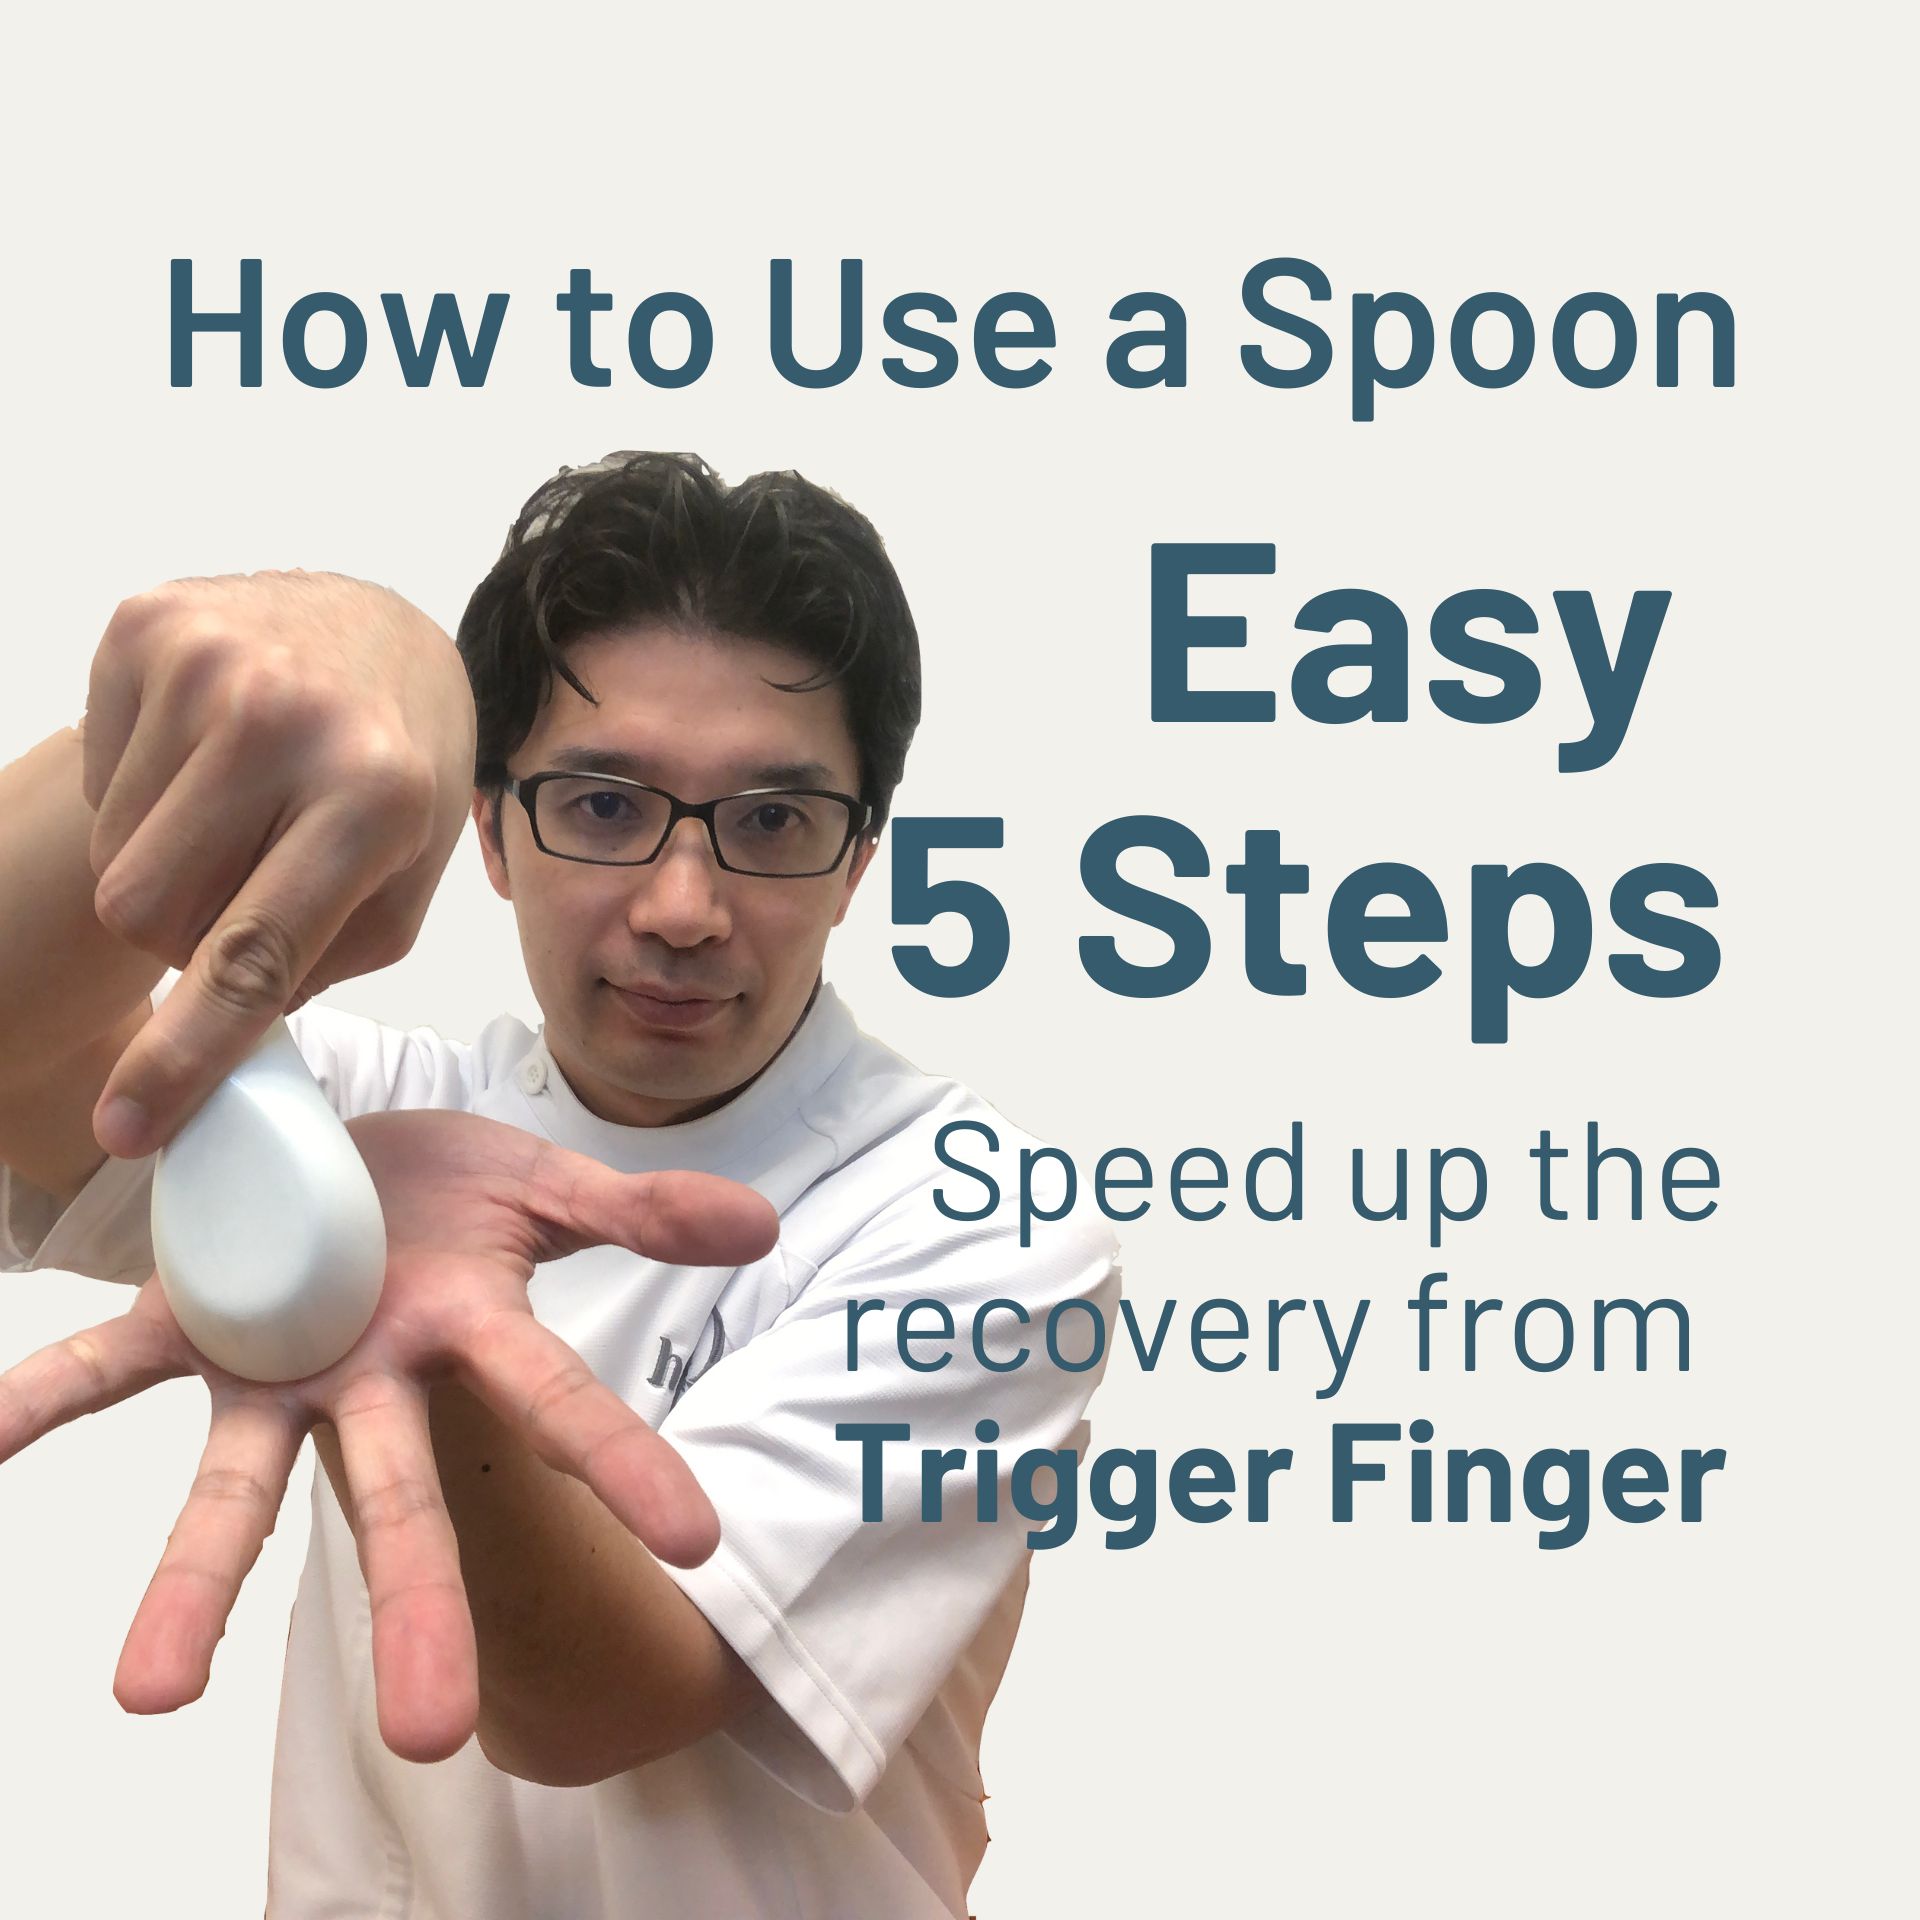 How to Use a Spoon to treat Your Trigger finger by yourself